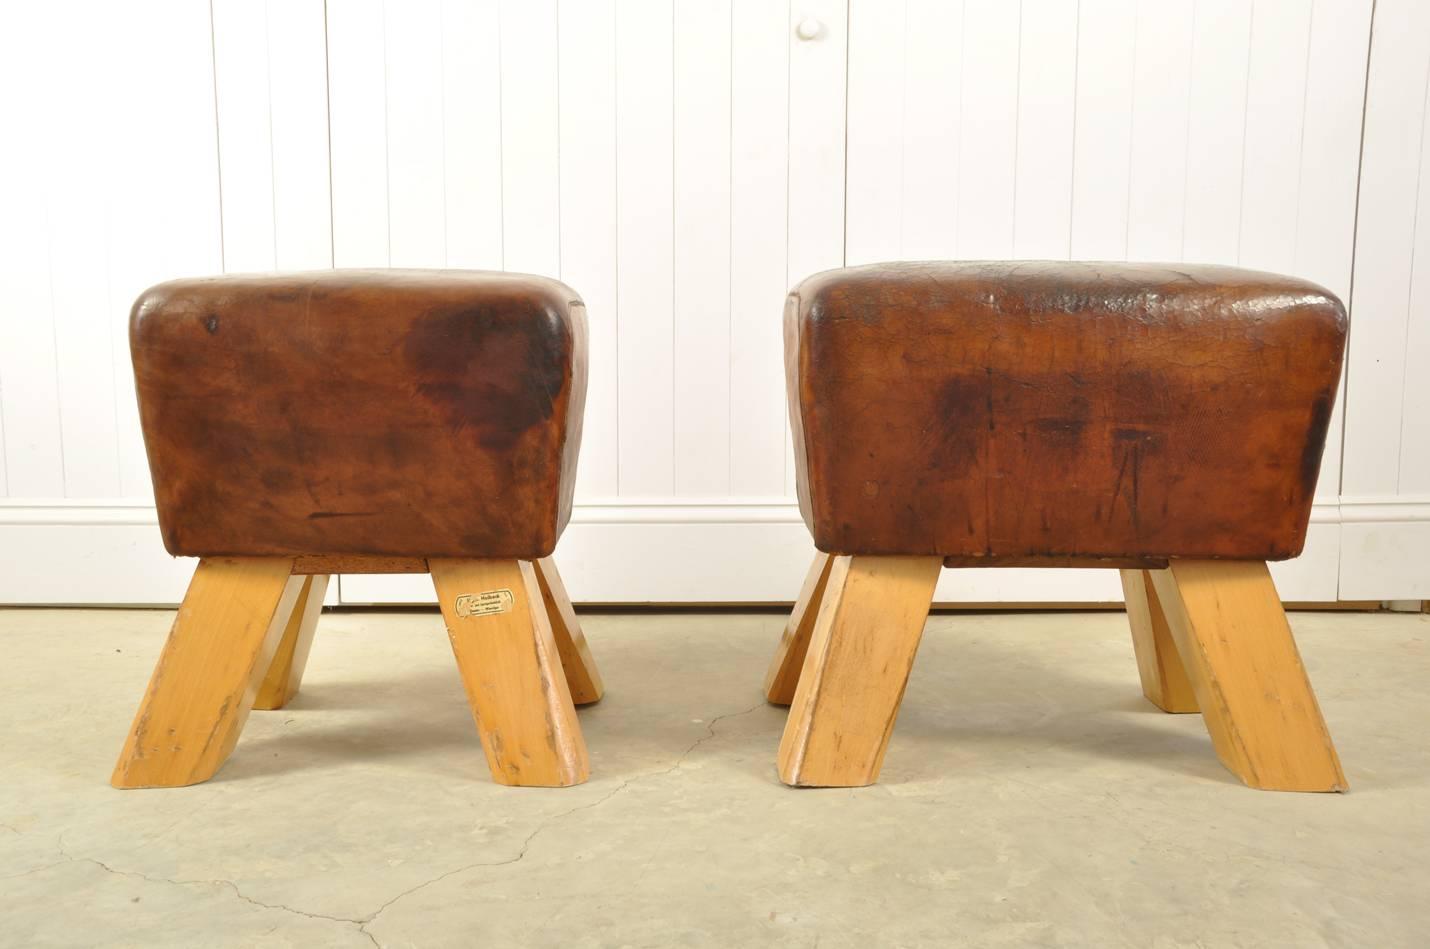 Mid-20th Century Small Vintage Reclaimed Leather Pommel Horse Bench